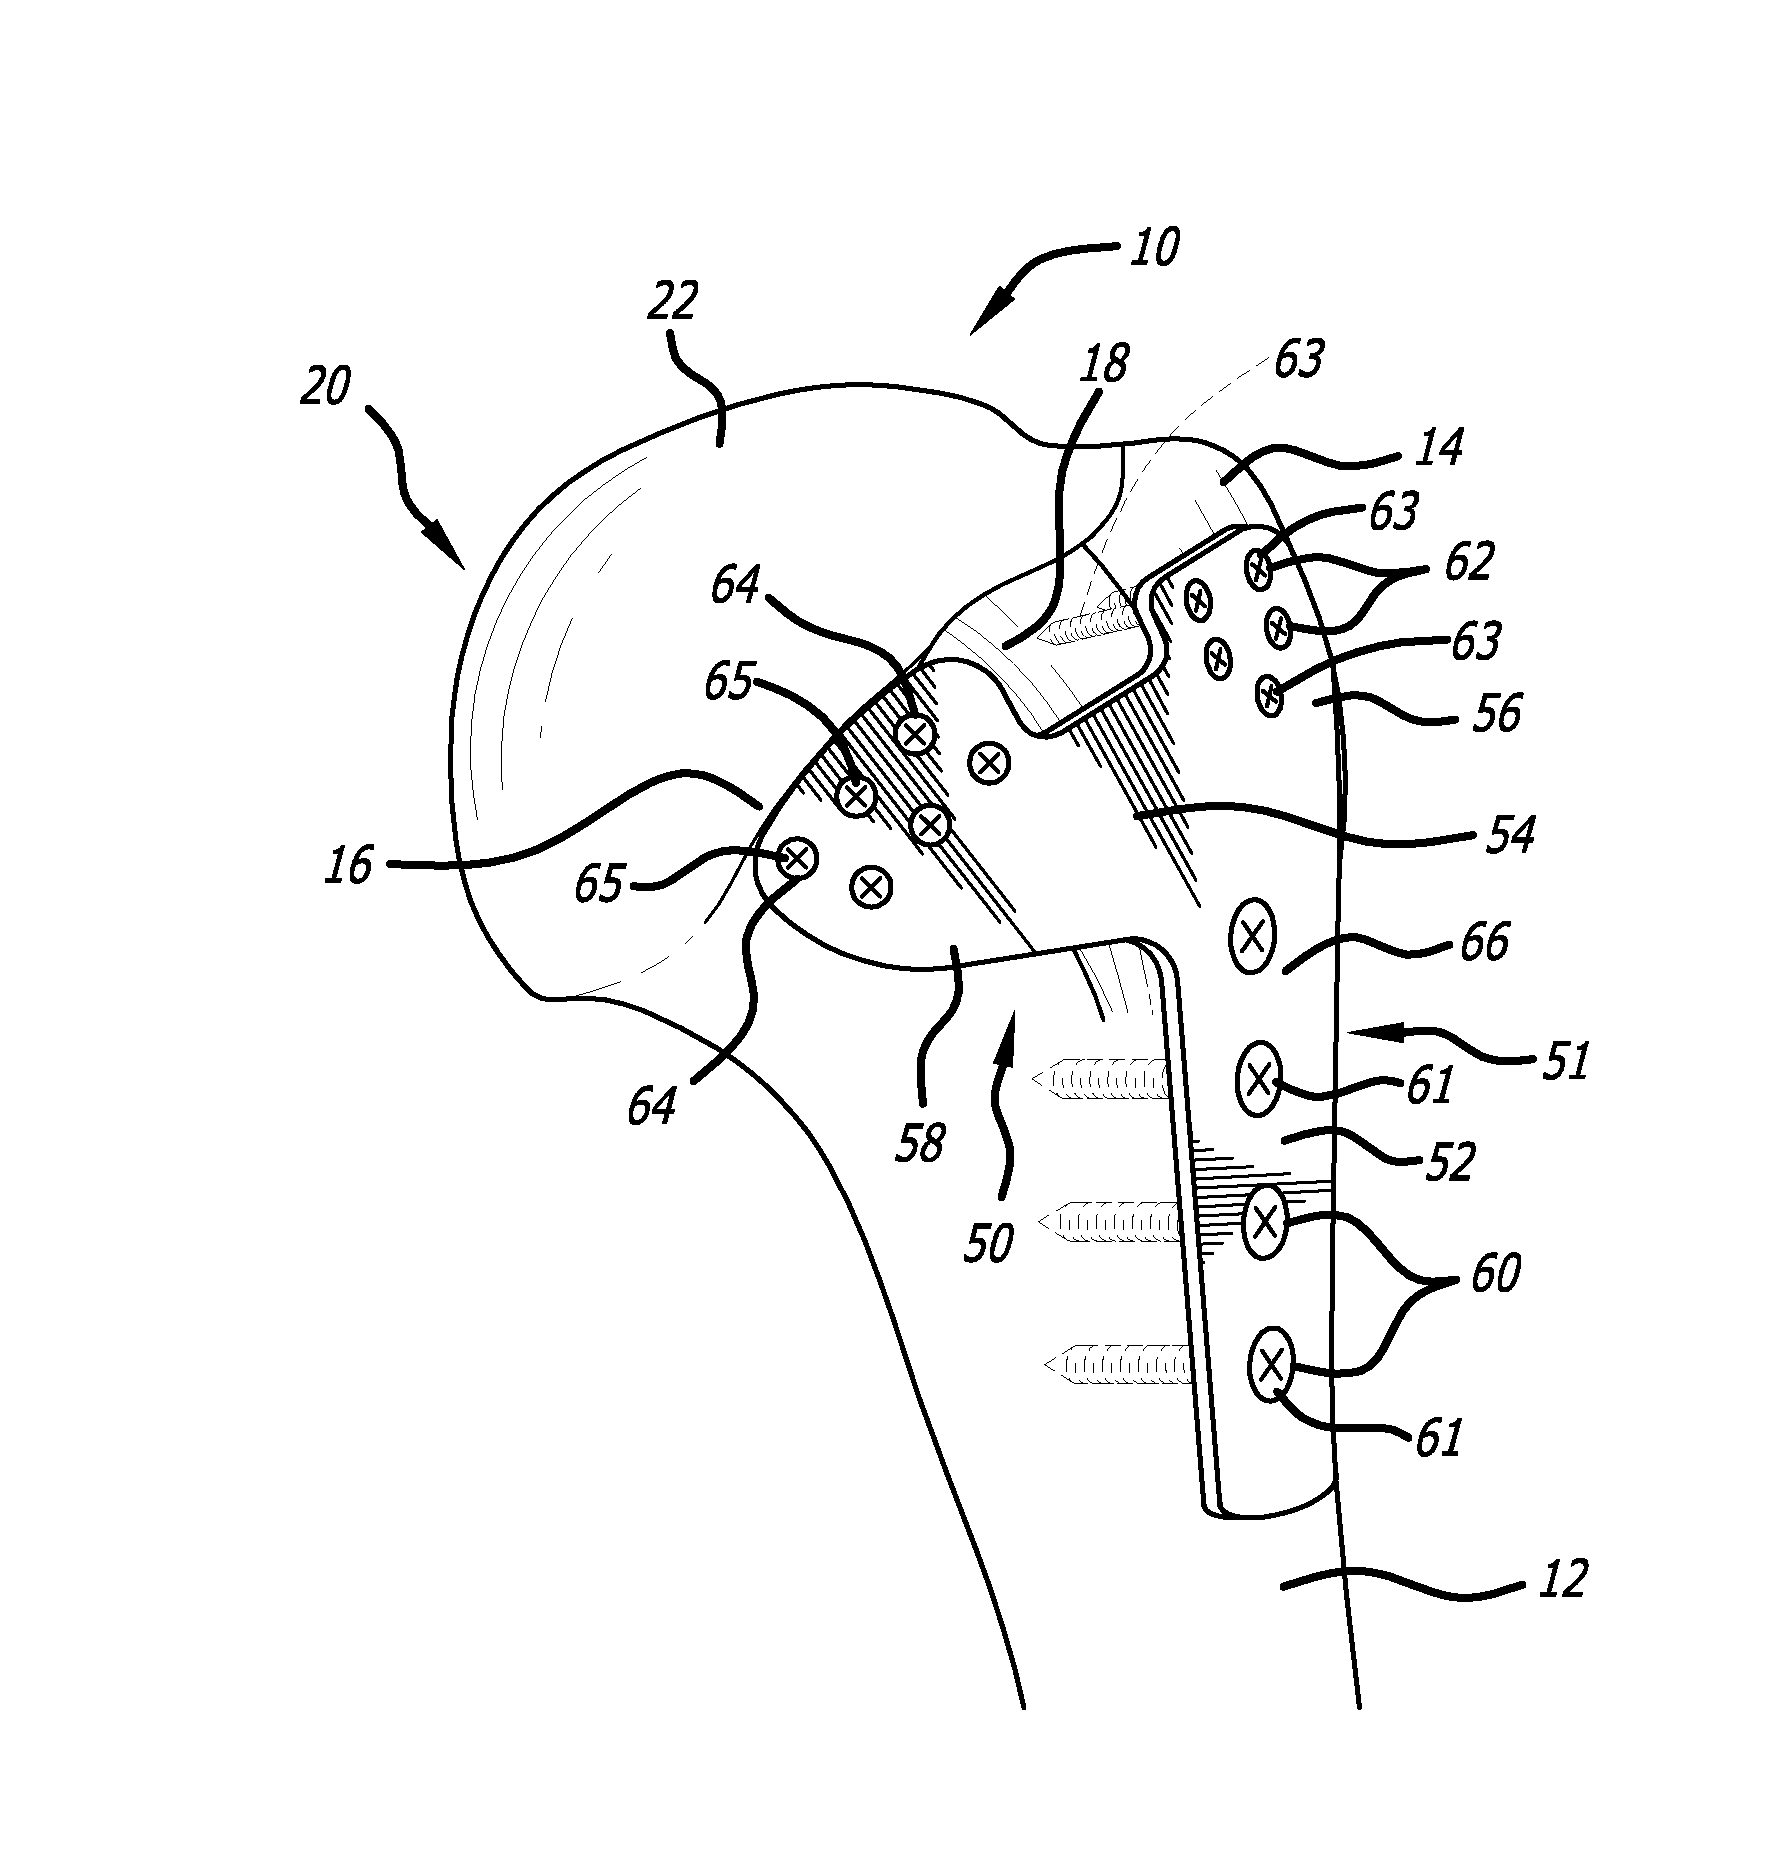 Anterior lesser tuberosity fixed angle fixation device and method of use associated therewith